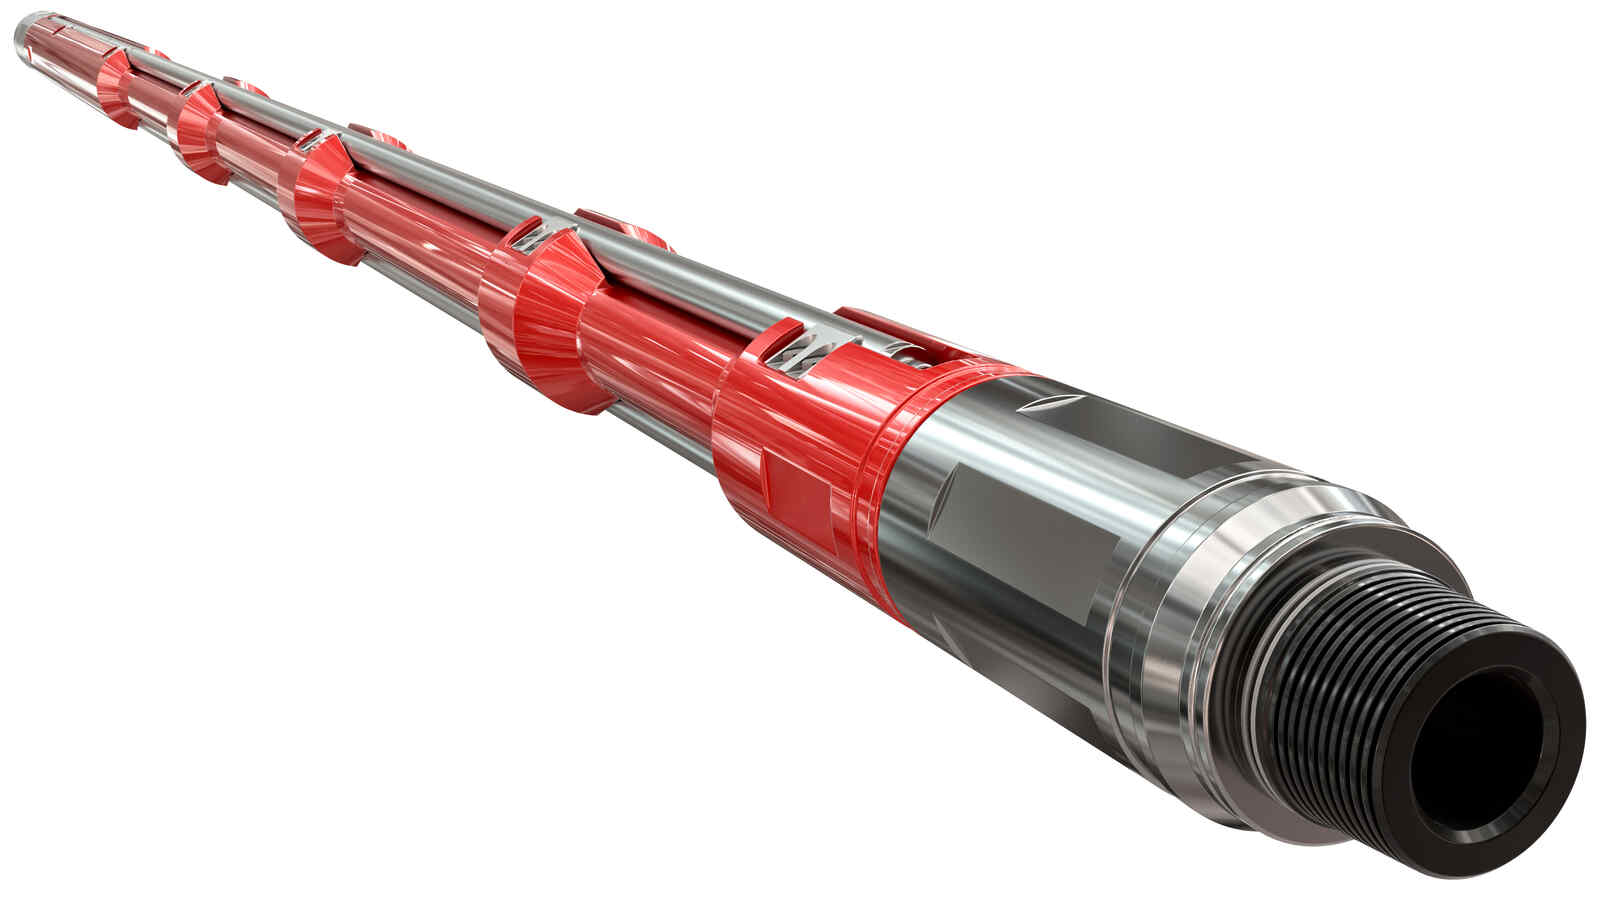 DynaTrac - The real-time "Downhole ruler" 